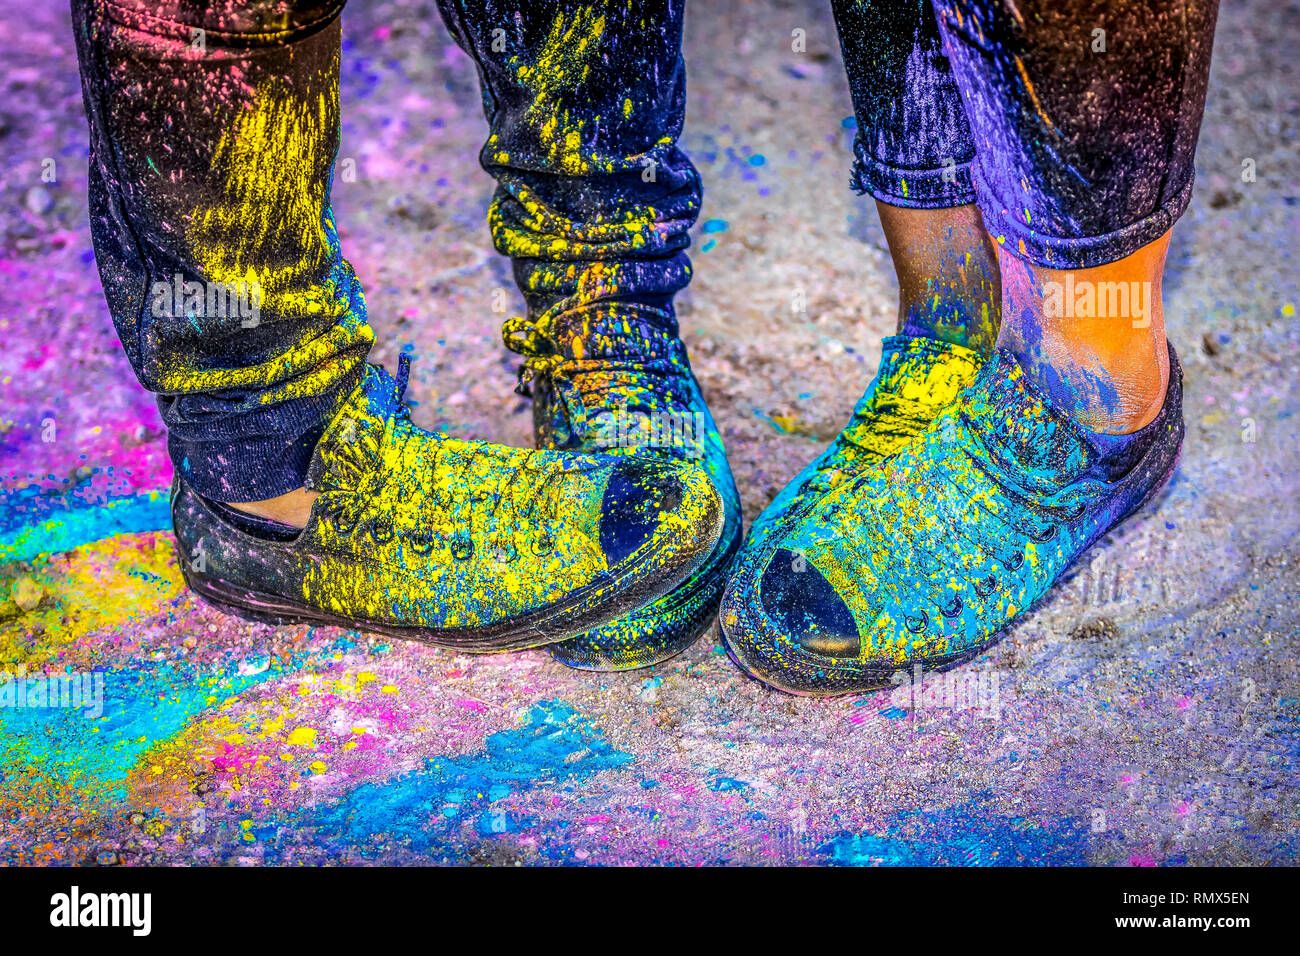 Black running shoes covered in colorful powder paint Stock Photo